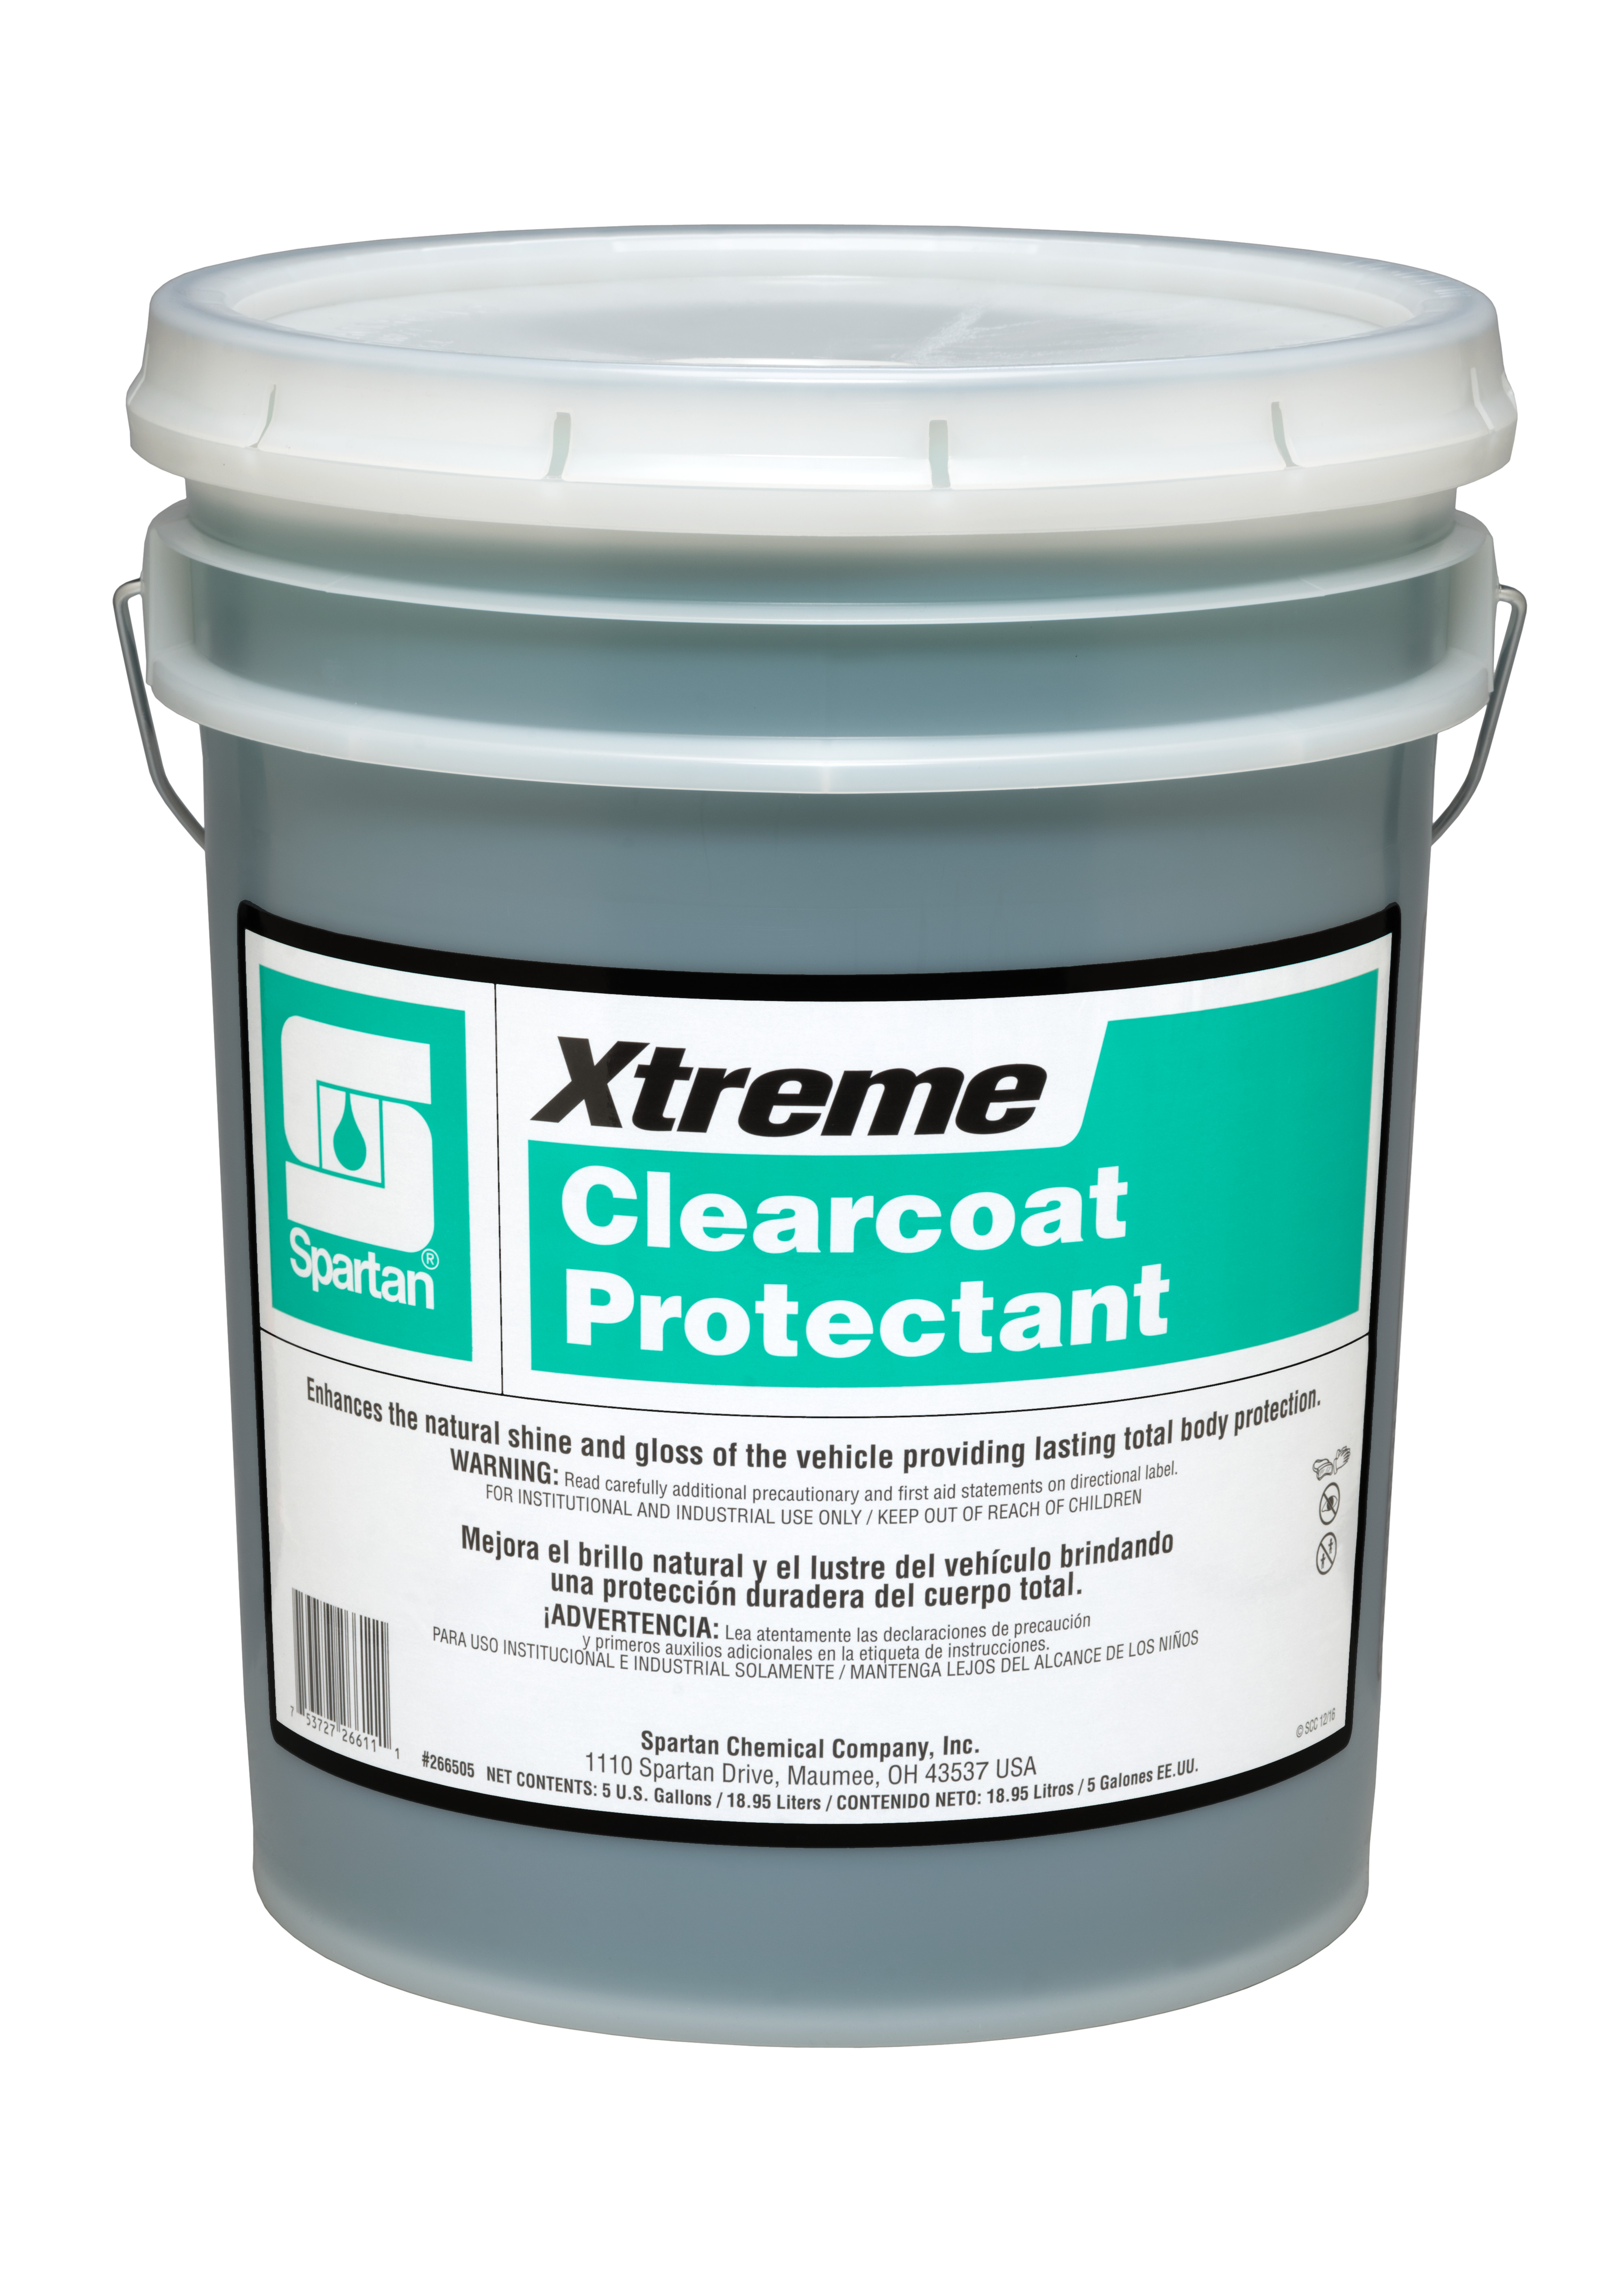 Spartan Chemical Company Xtreme Clearcoat Protectant, 5 GAL PAIL